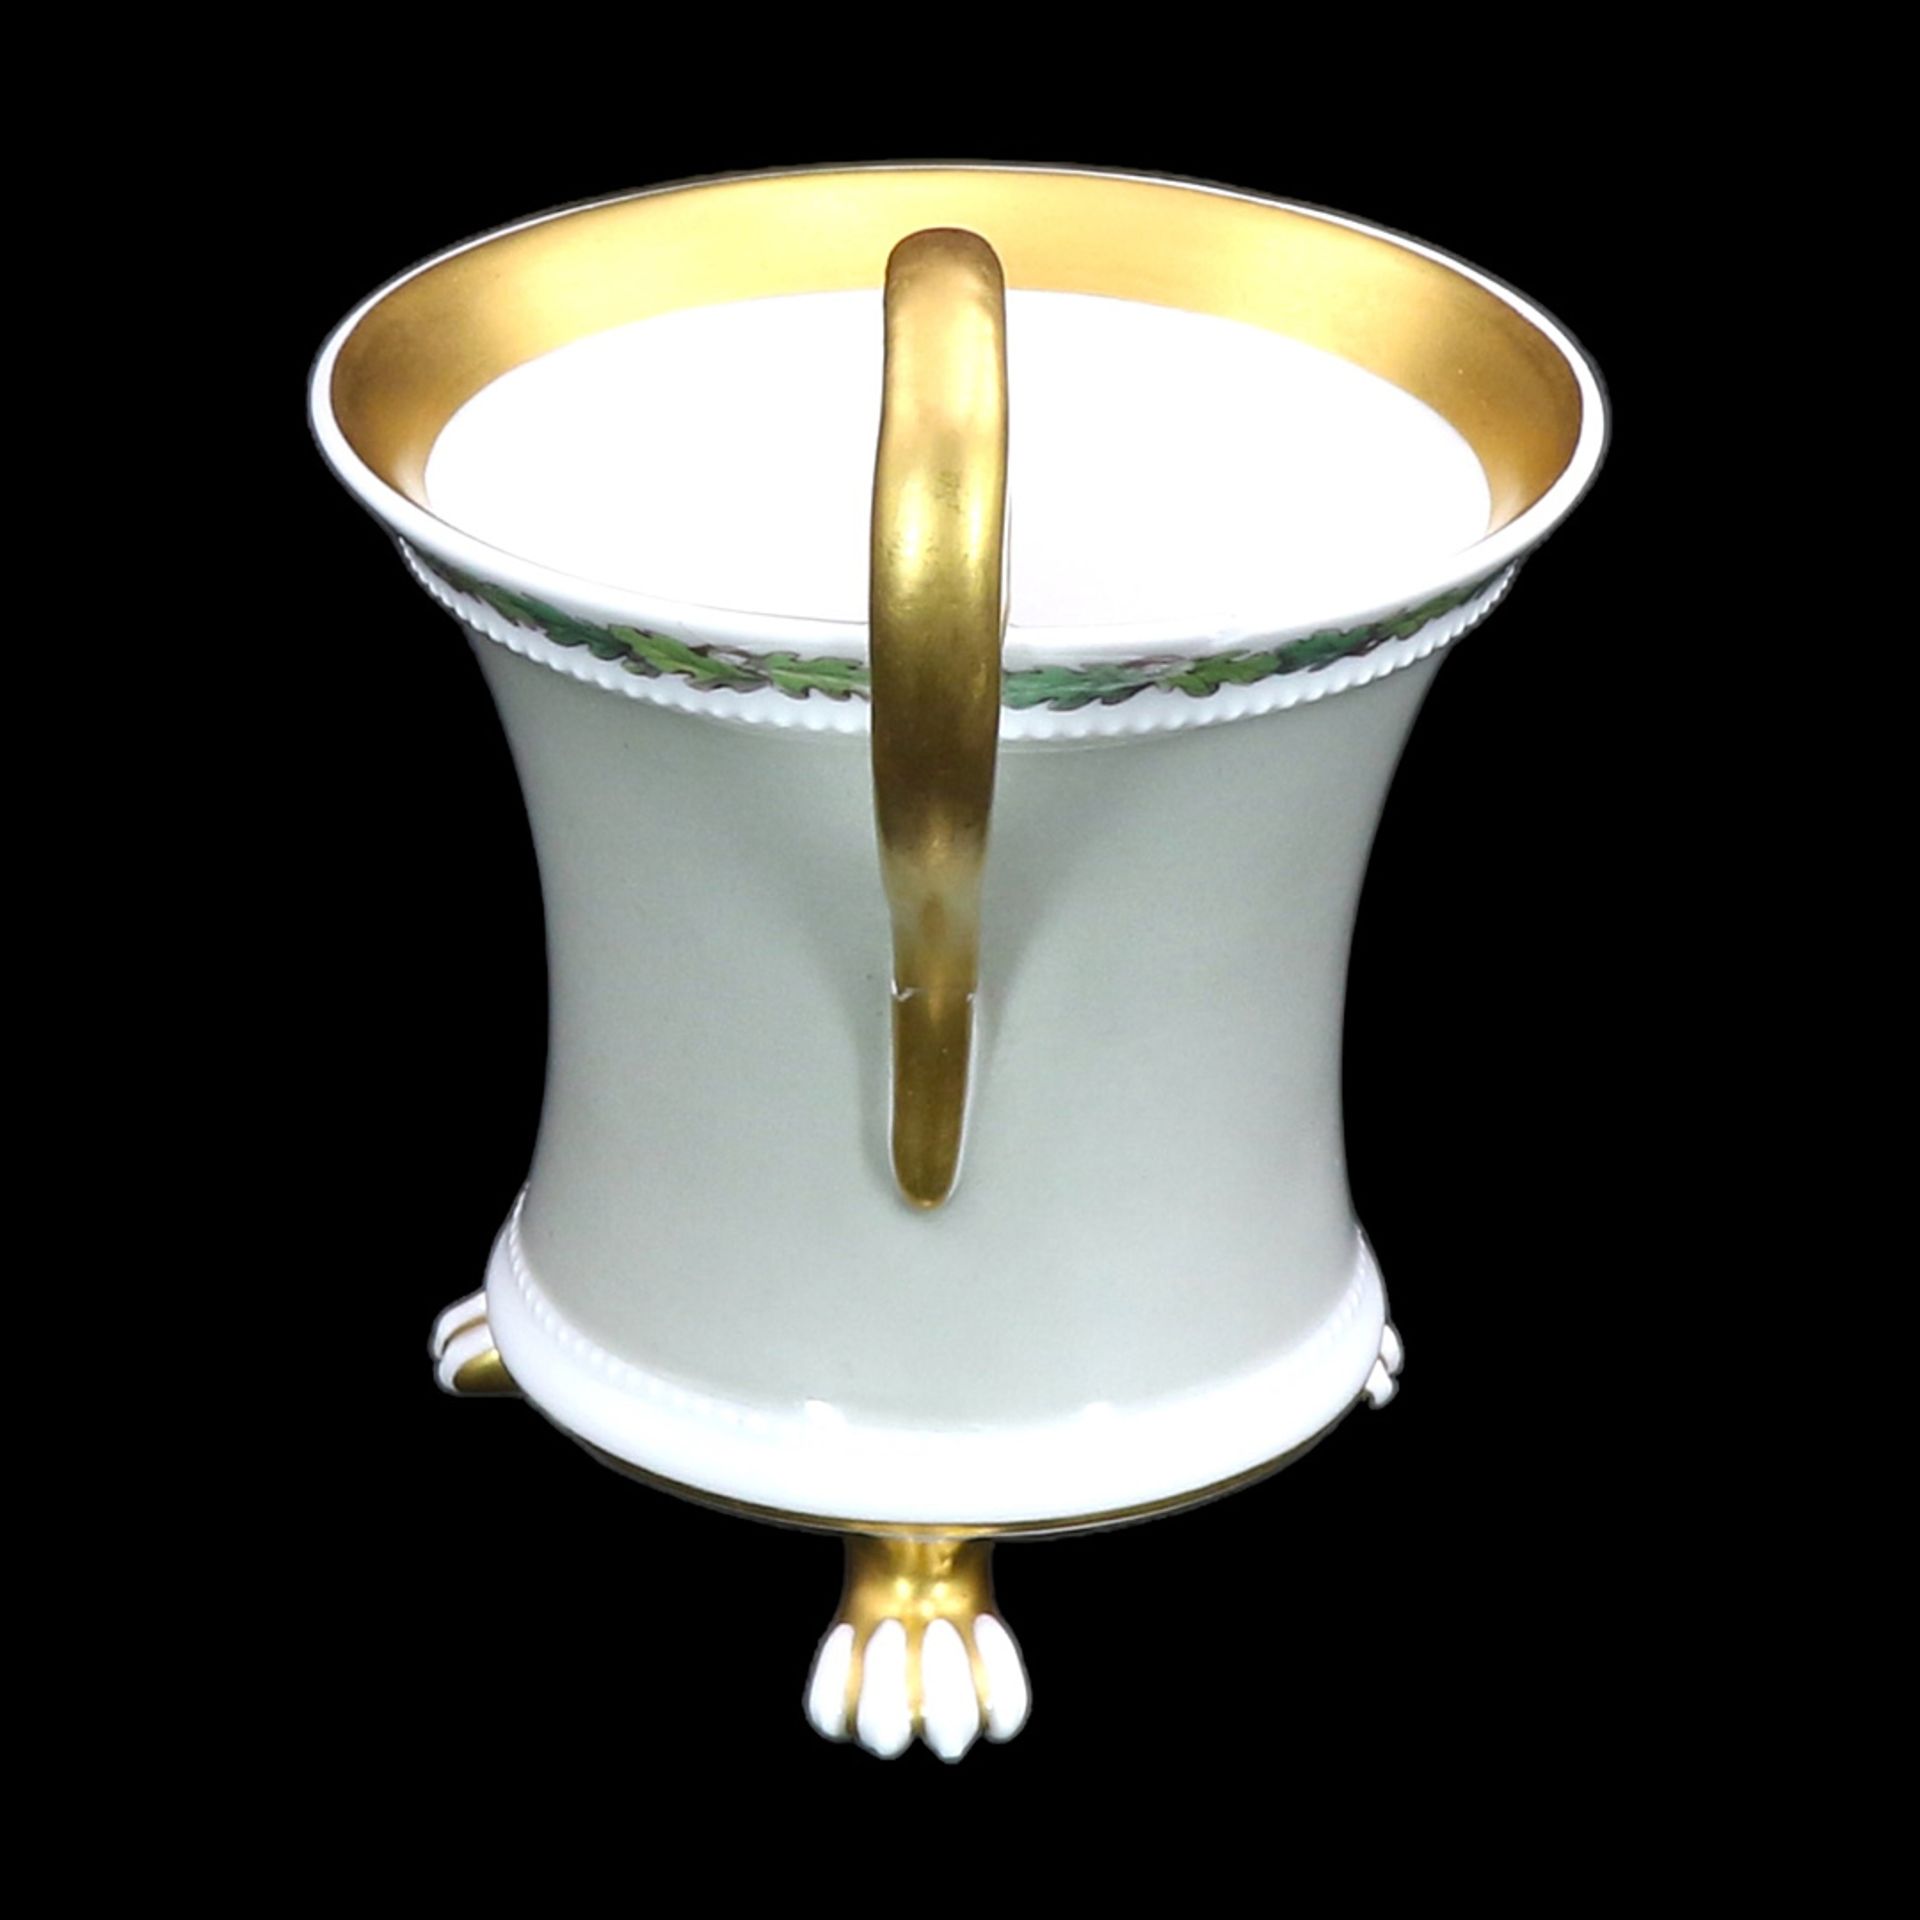 KPM Berlin cup with "Iron Cross" and saucer - Image 5 of 6